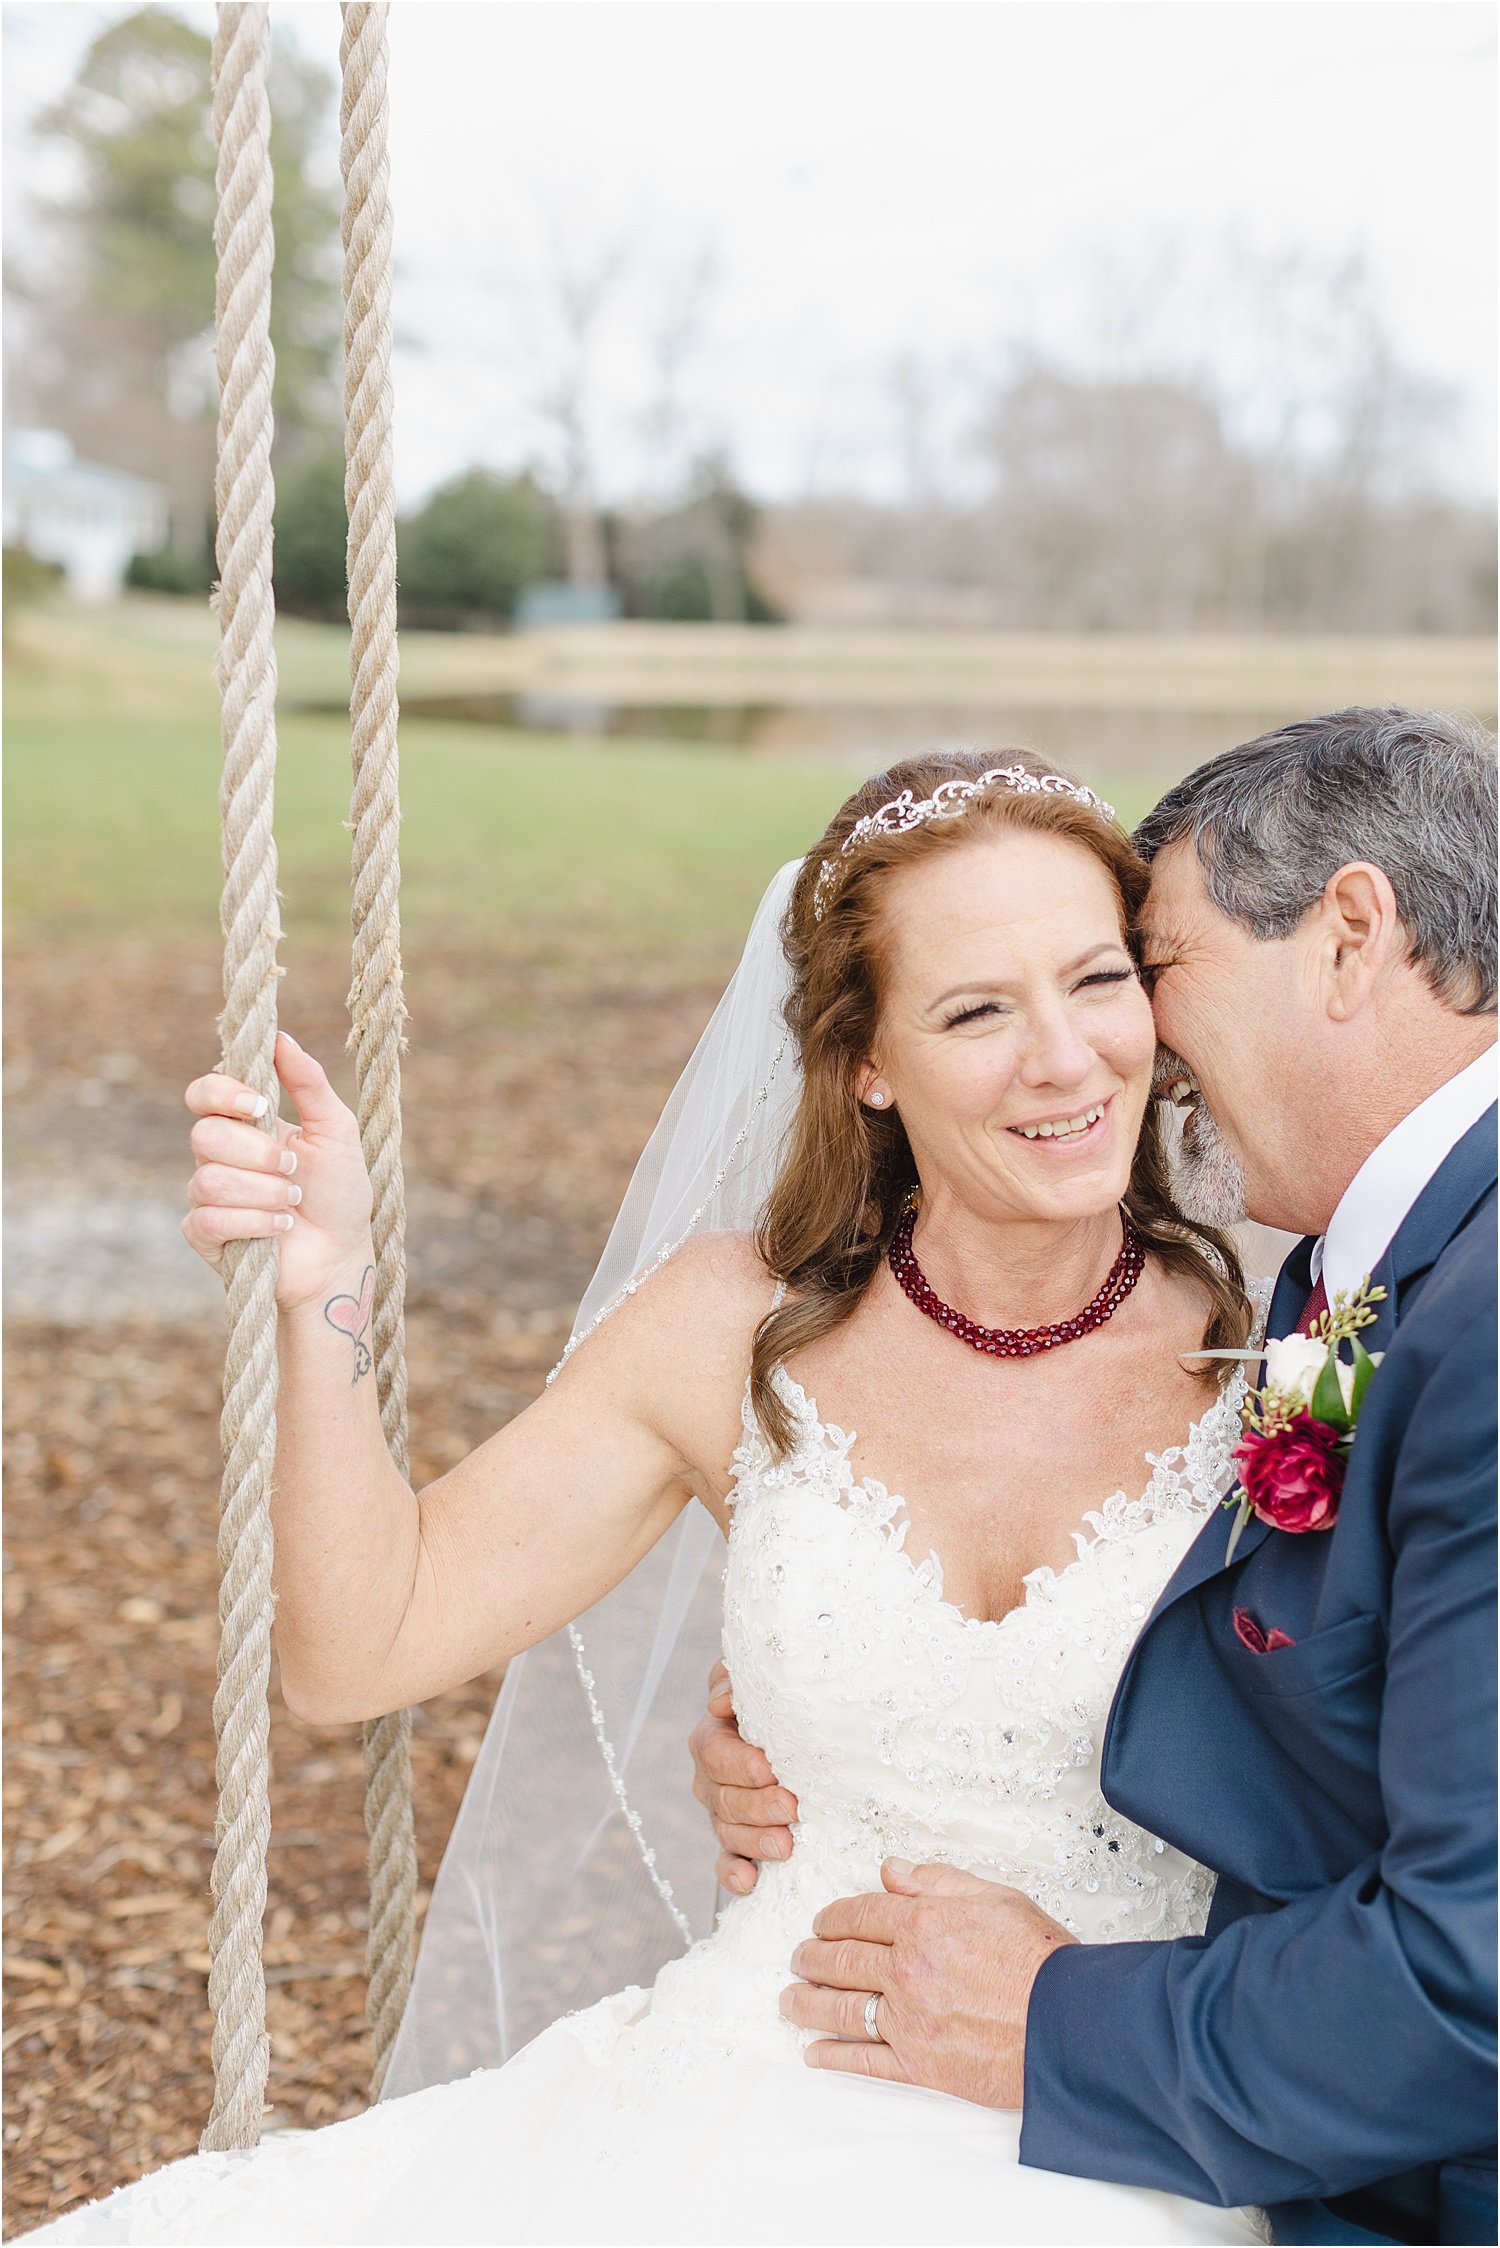 Photo of Bride and Groom on Swing